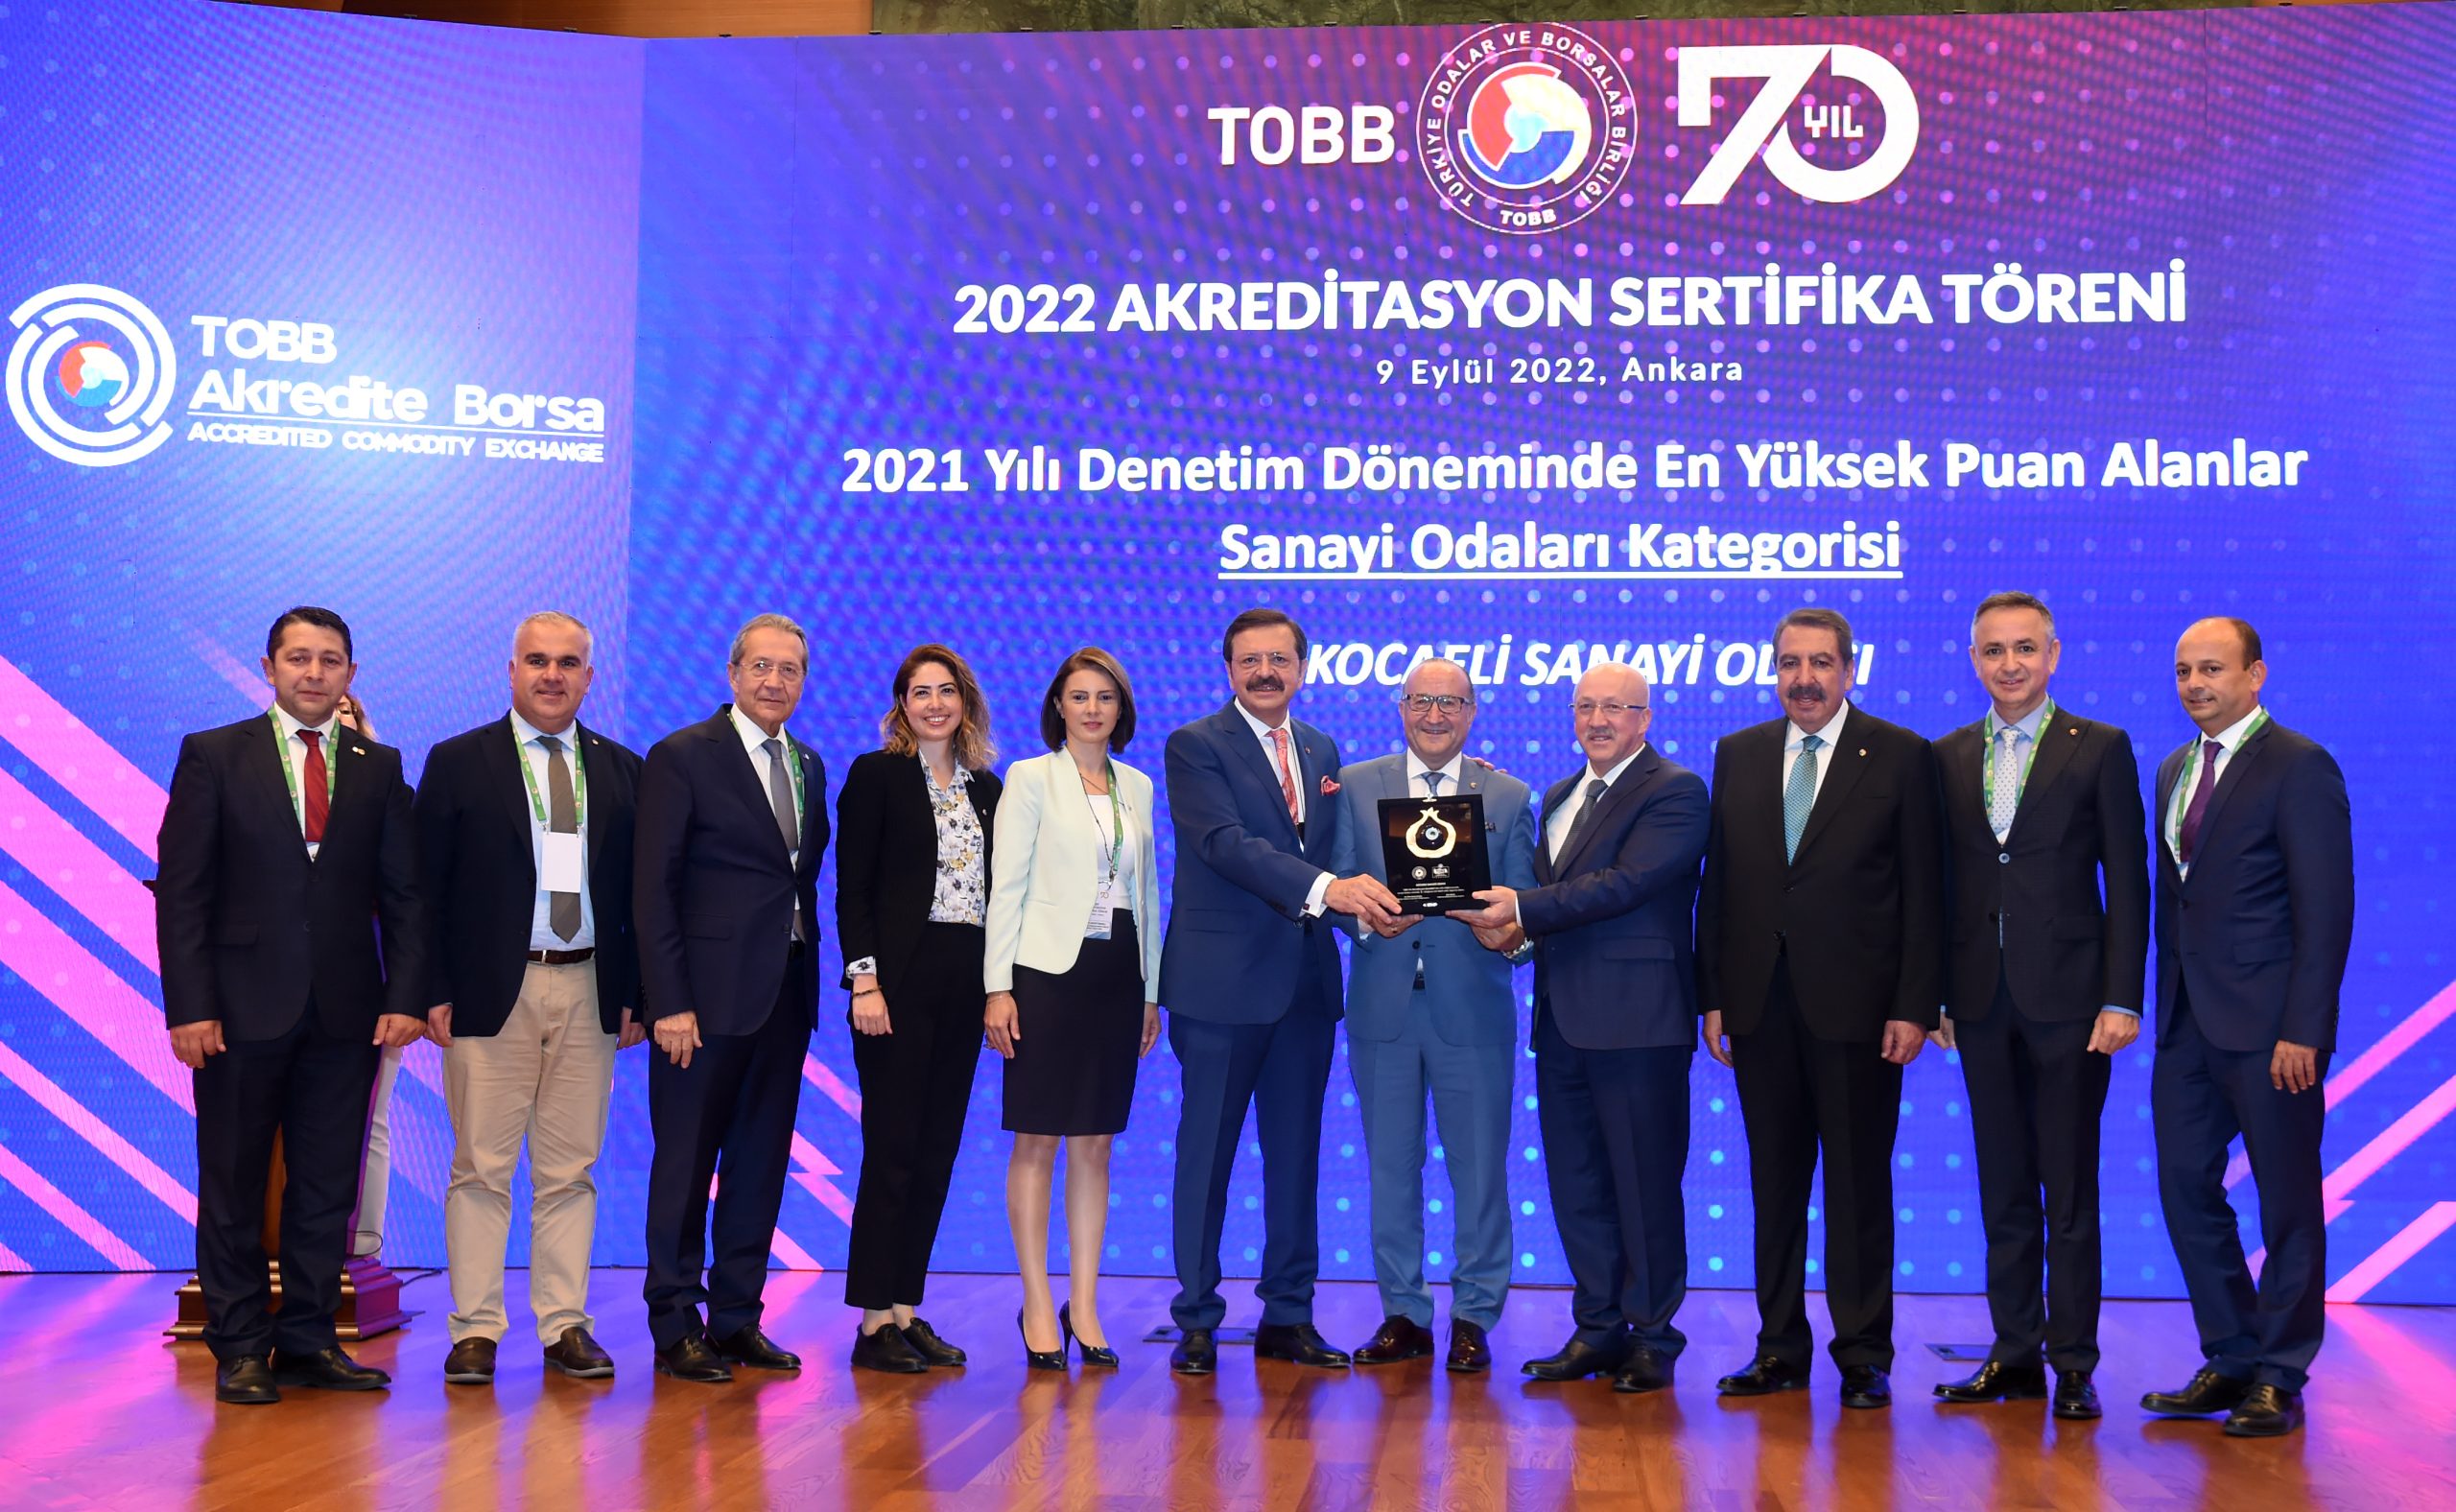 Kocaeli Chamber of Industry (KCI), which maintains its ‘’A Class Excellent Chamber’’ status, received a ‘first place’ certificate